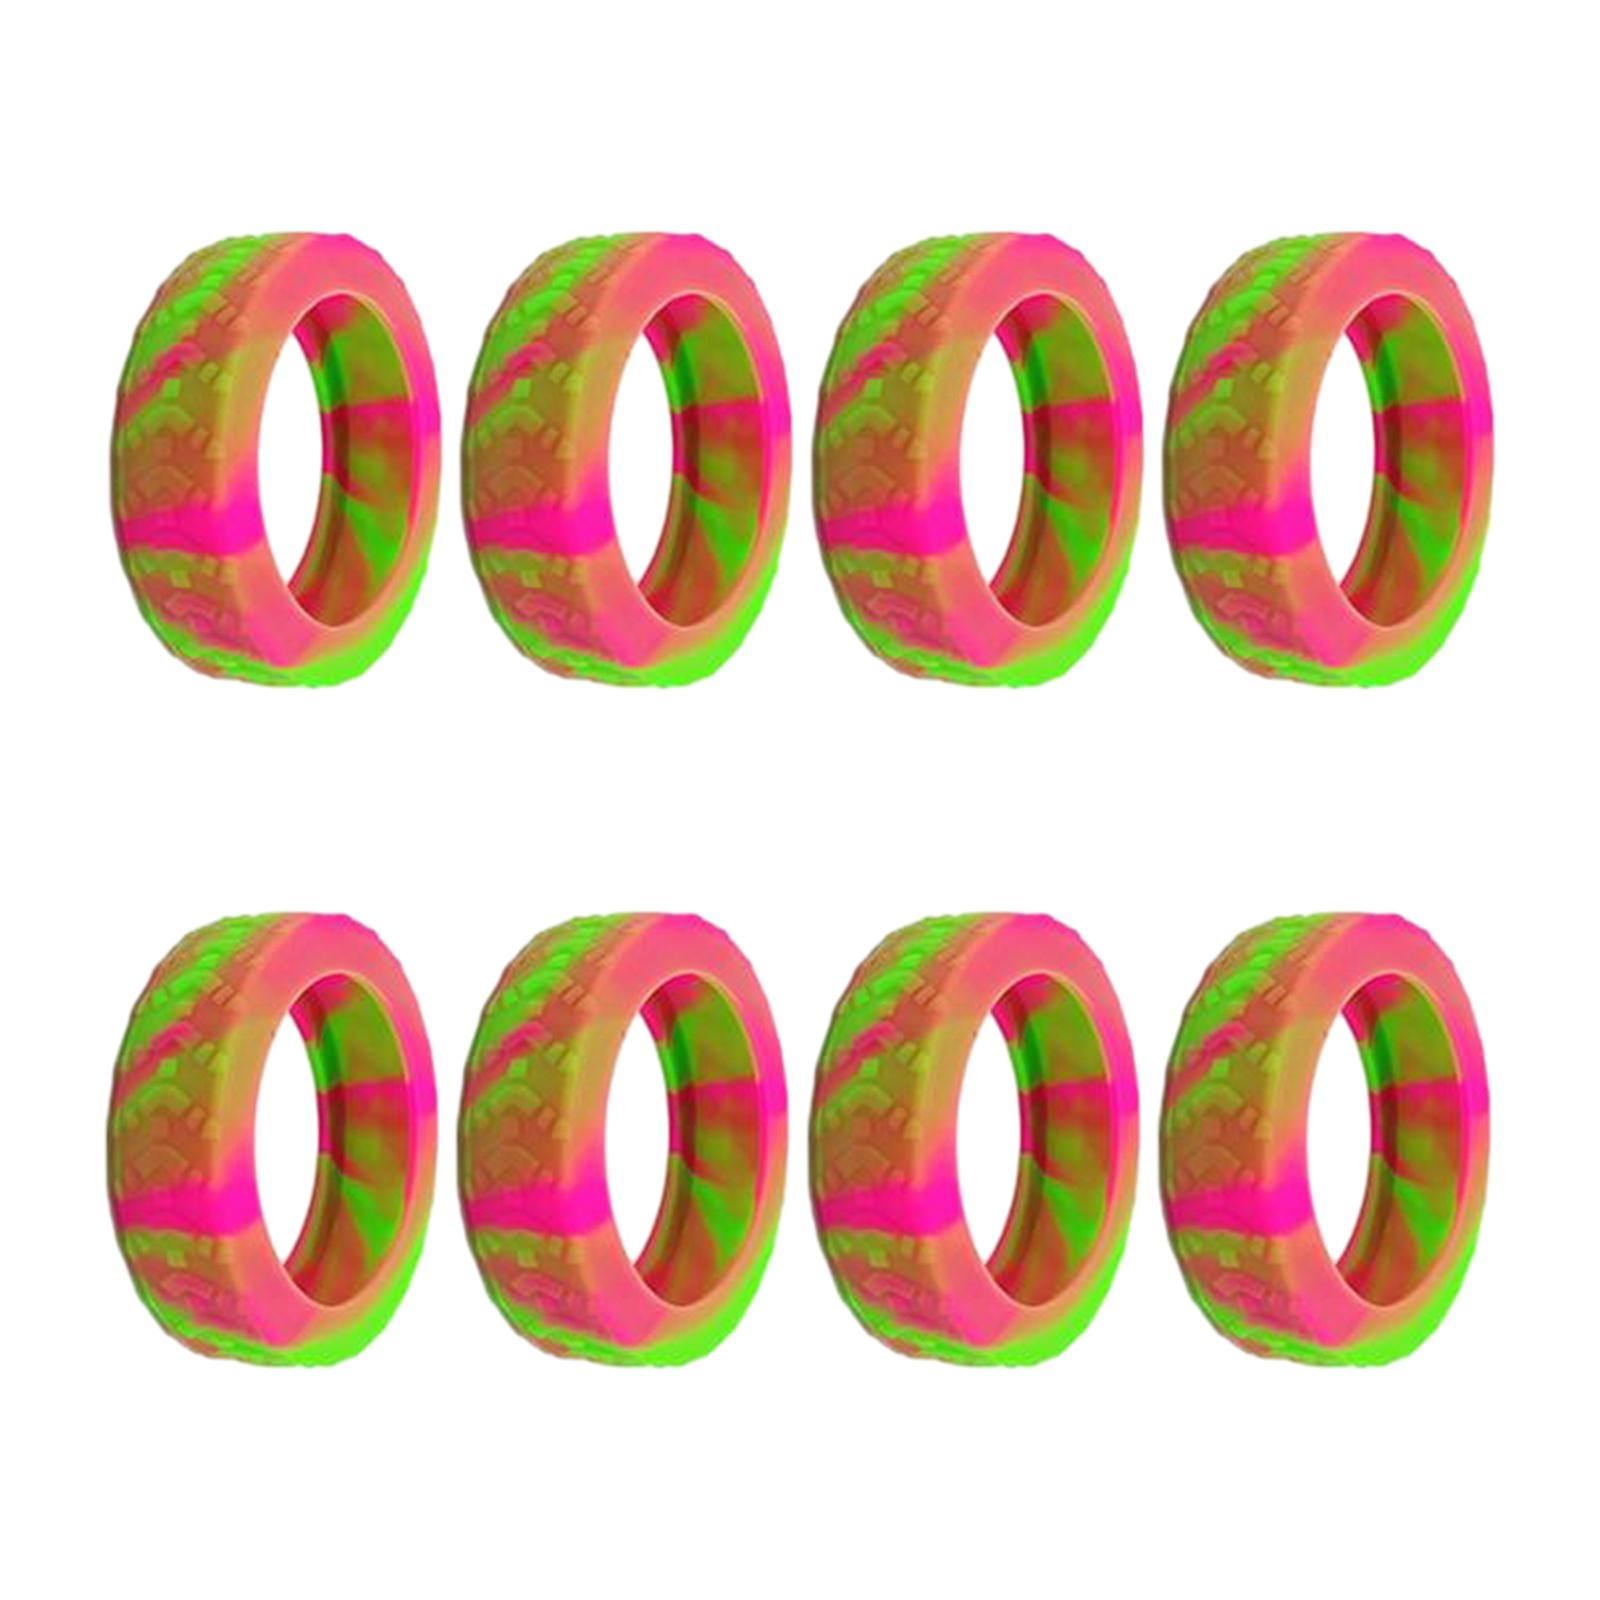 8 Pieces Silicone Suitcase Wheel Covers Accessory for 5cm-7cm Wheels Stylish Style B